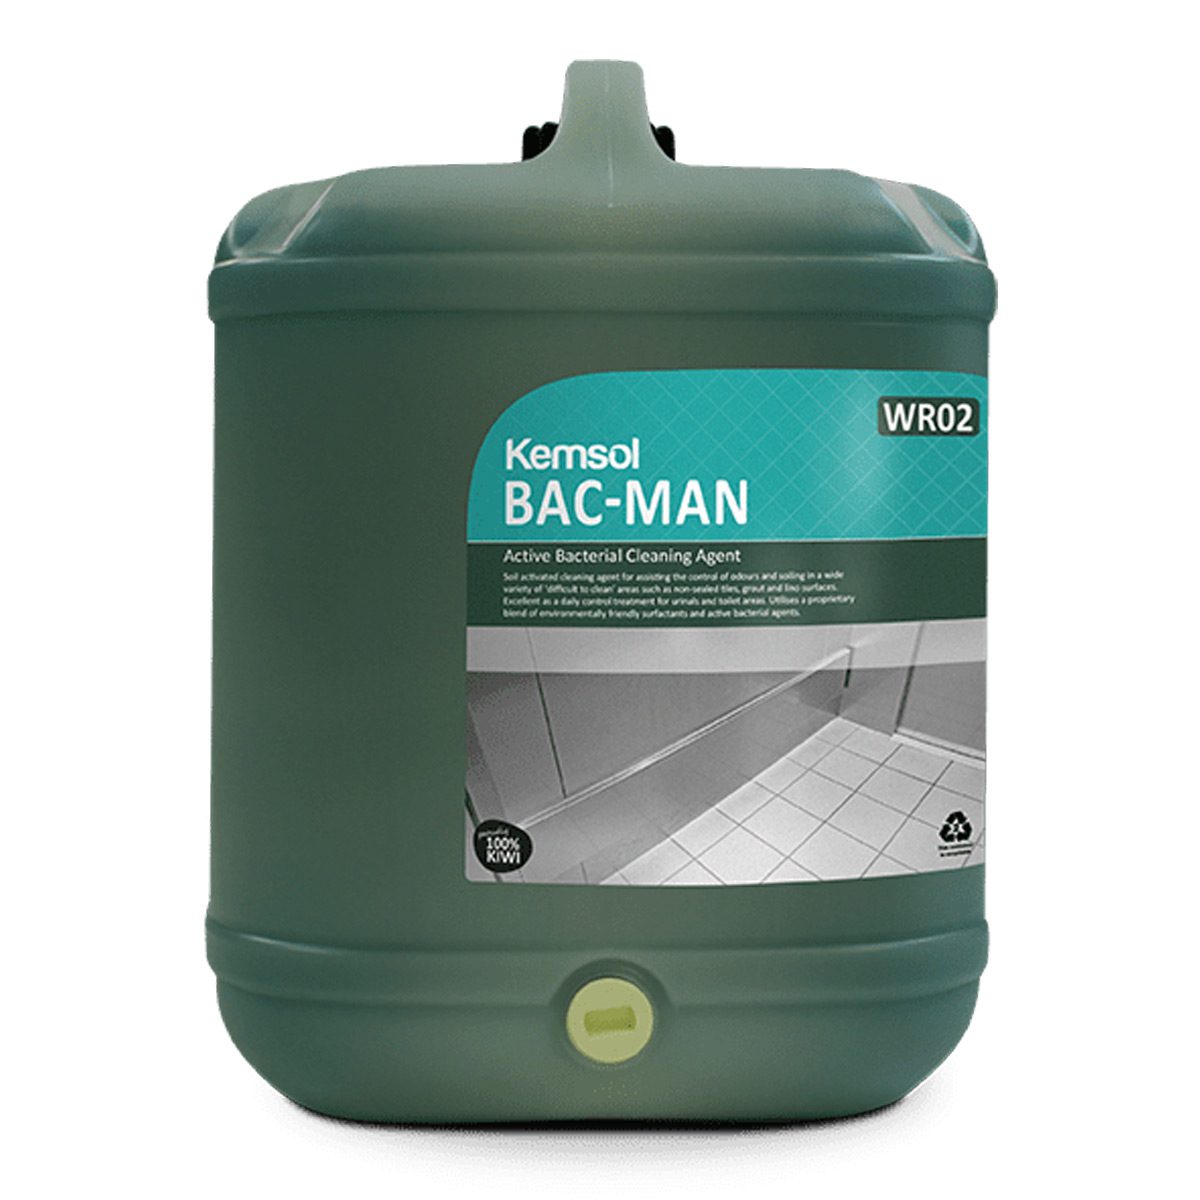 cleaning-products-odour-pest-kemsol-bac-man-cleaner-20L-litre-soil-activated-cleaning-agent-daily-control-treatment-for-urinals-and-toilet-areas-vjs-distributors-KBACMA20